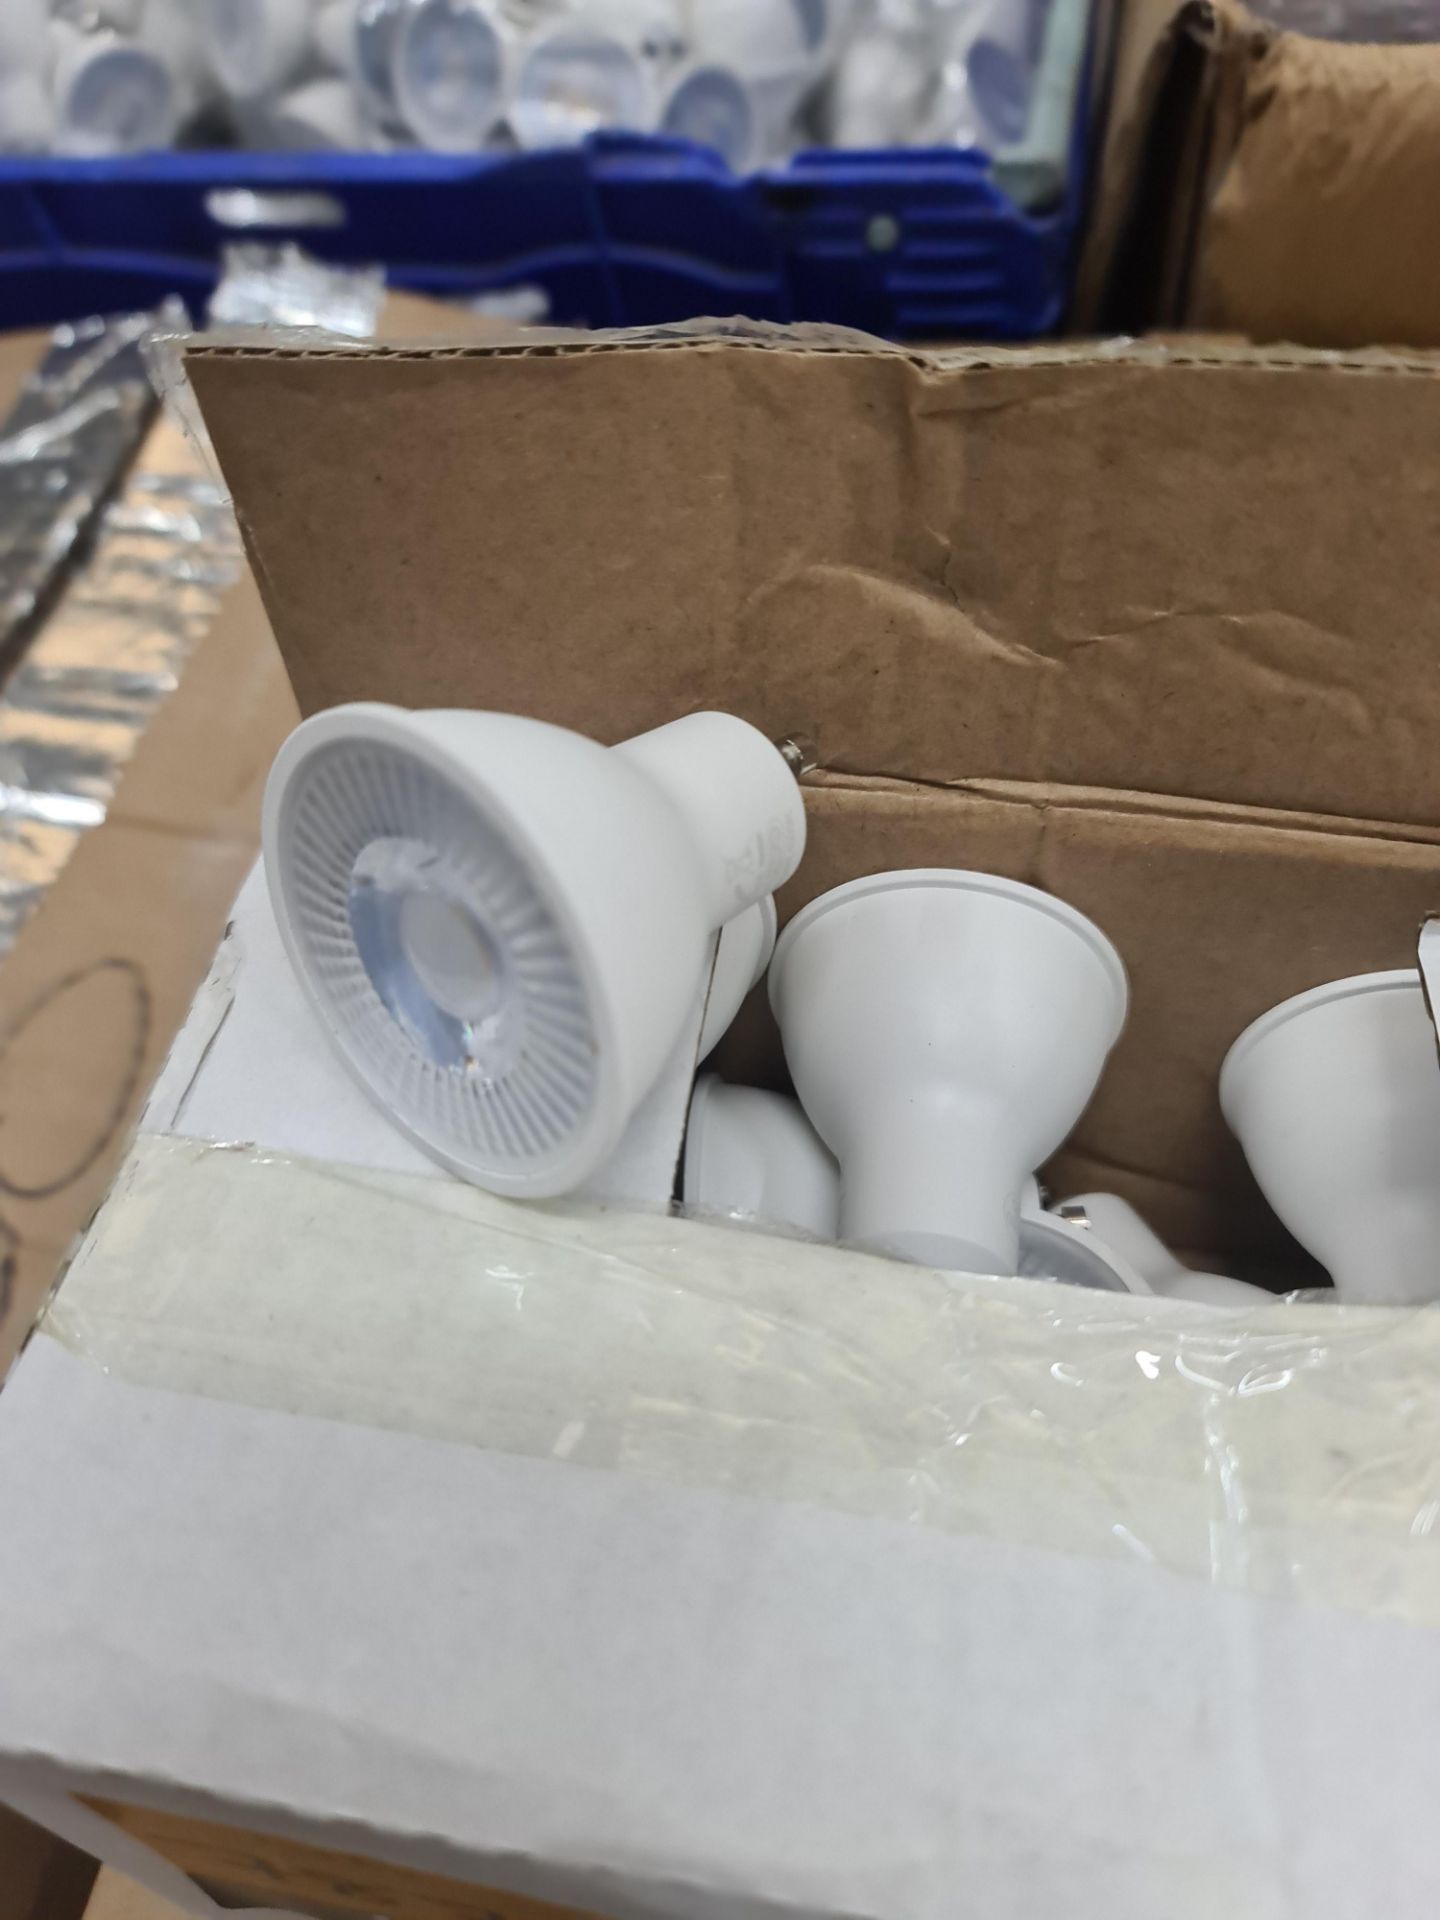 Approximately 200 off LED GU10 fitting cool white bulbs